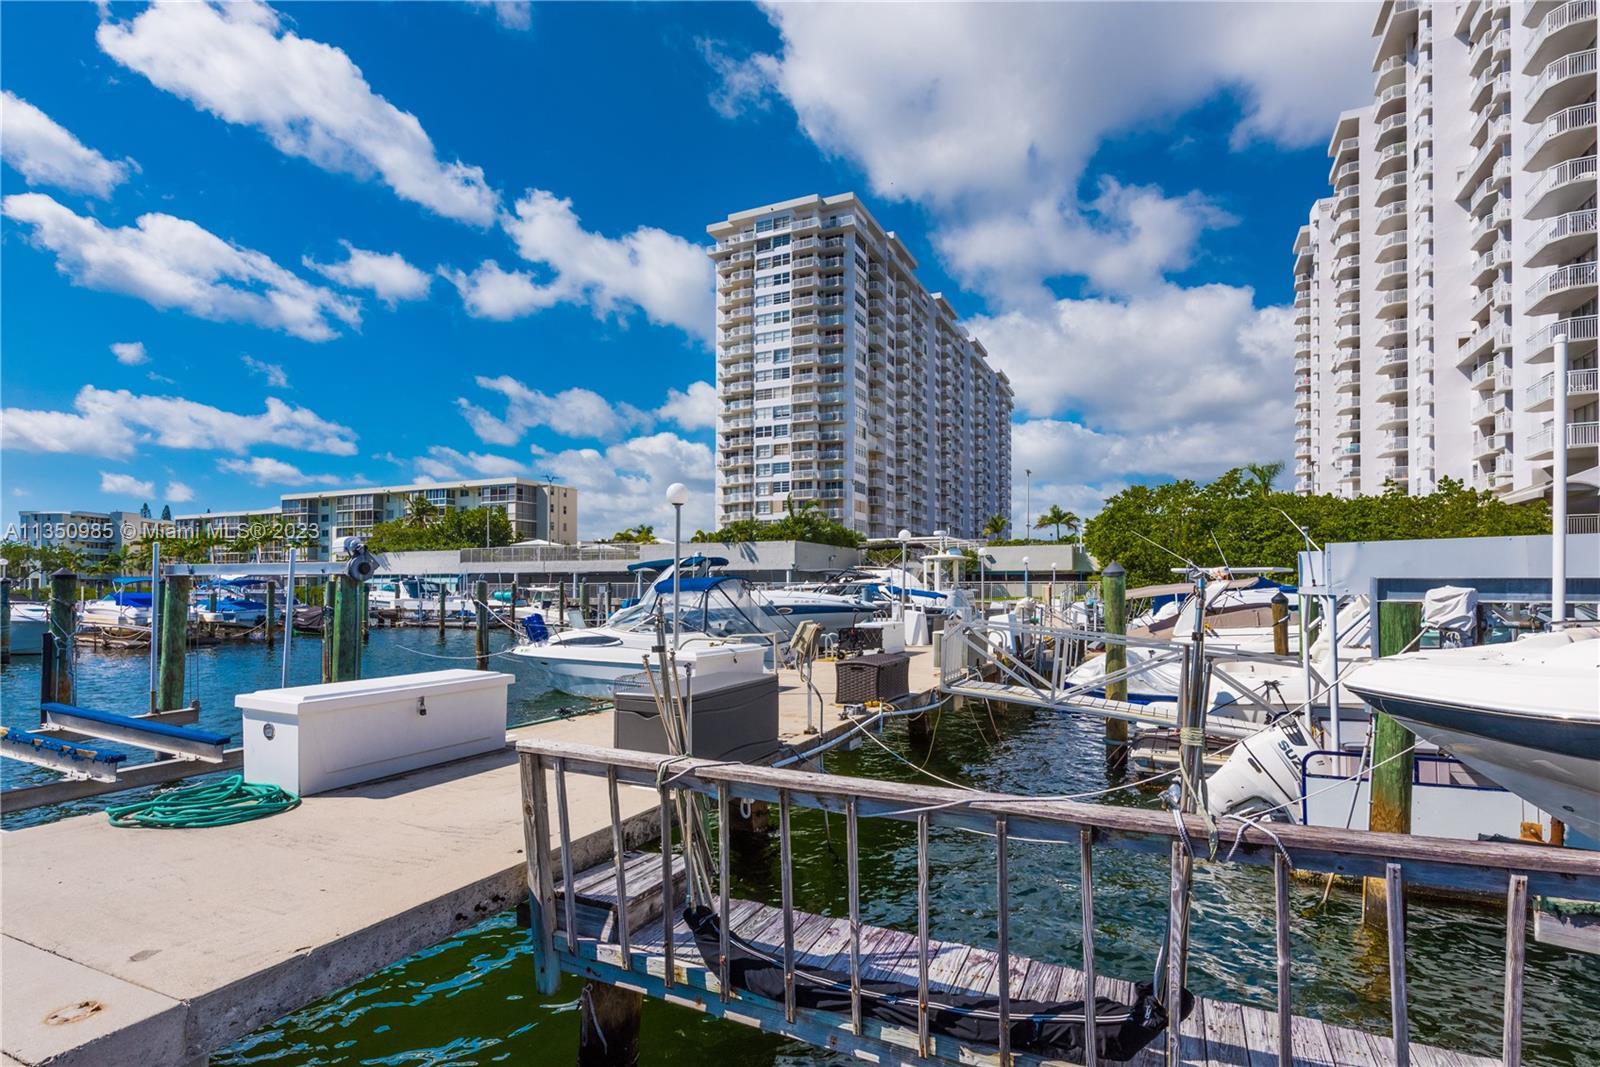 Excellent priced 2BED/2BATH waterfront condo (1565 sq.ft.). Modern eat-in kitchen, large living room